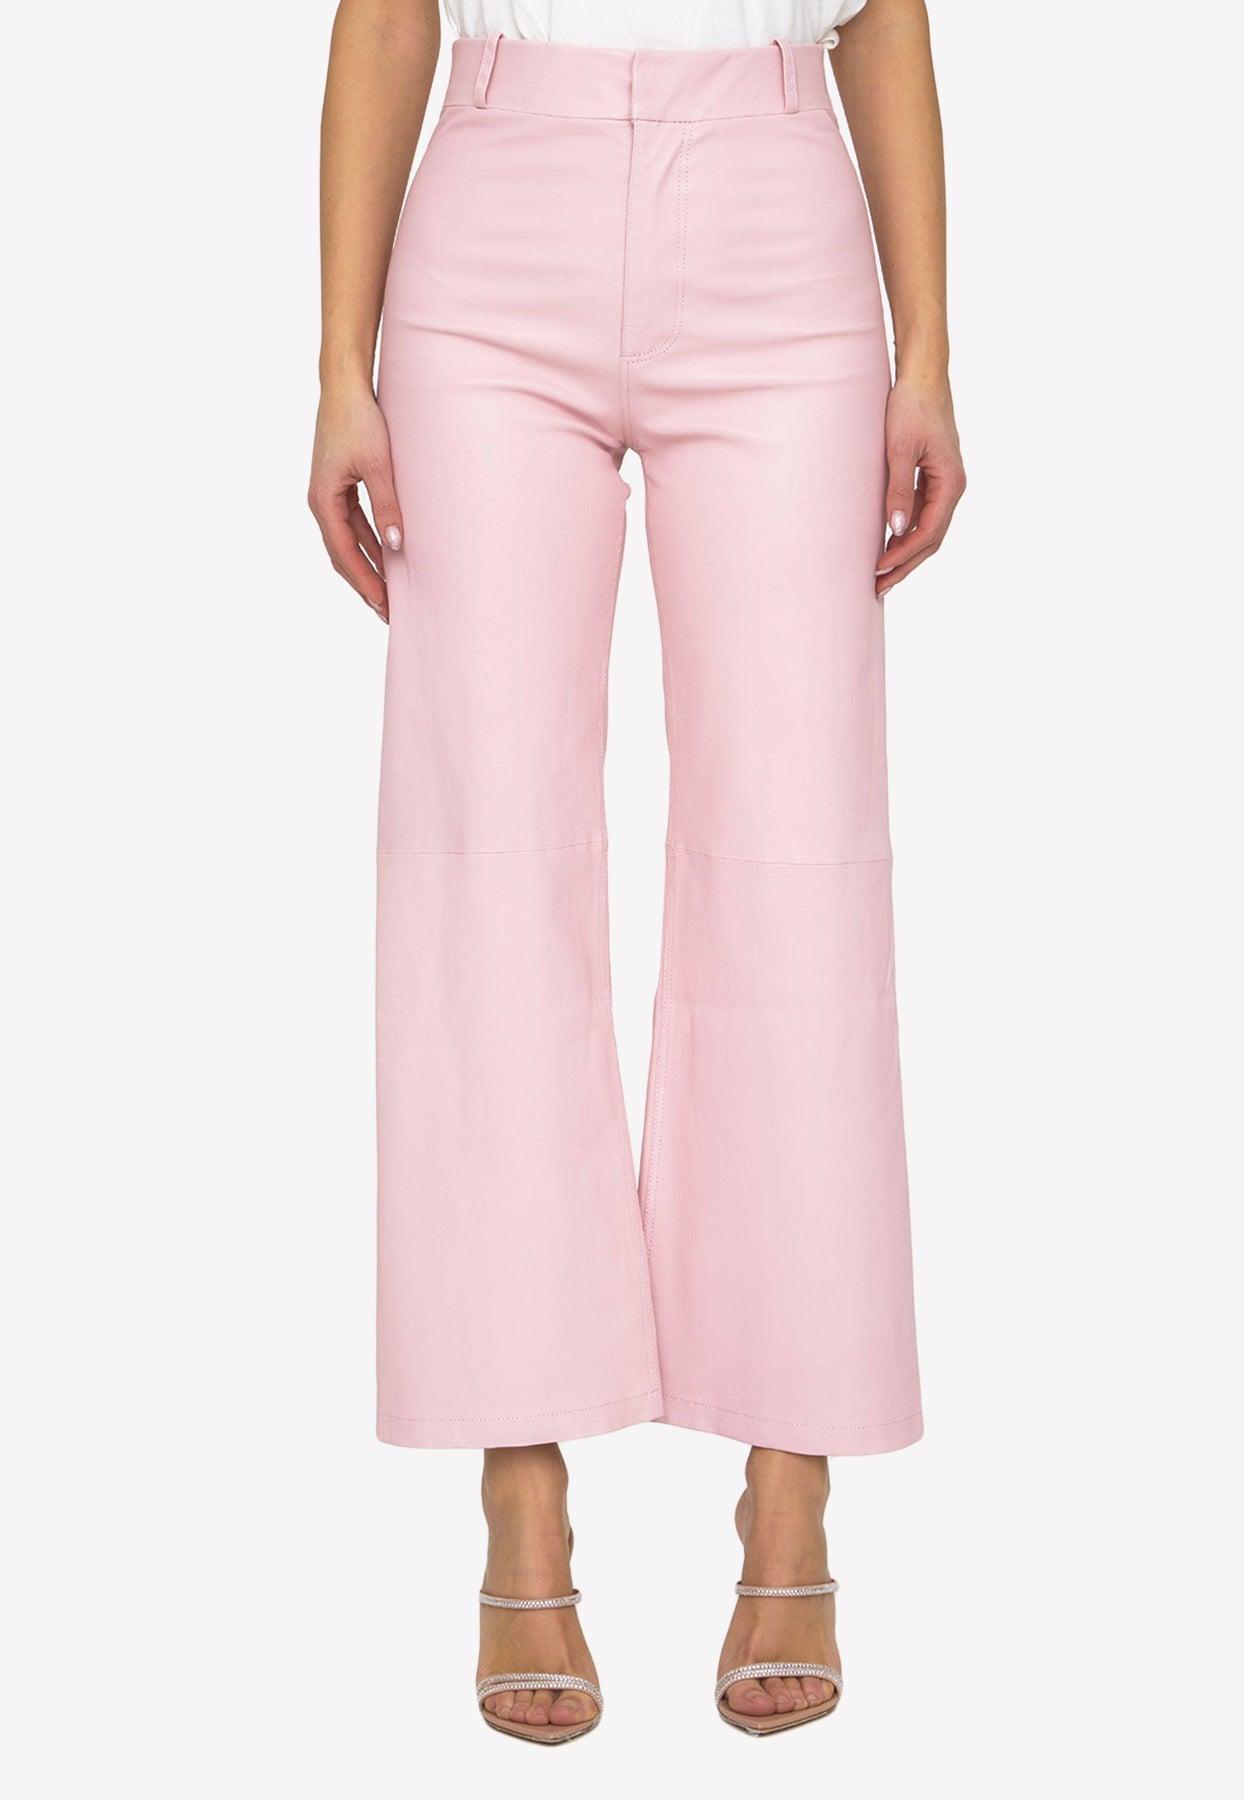 Arma Stretch Palazzo Pants in Pink | Lyst